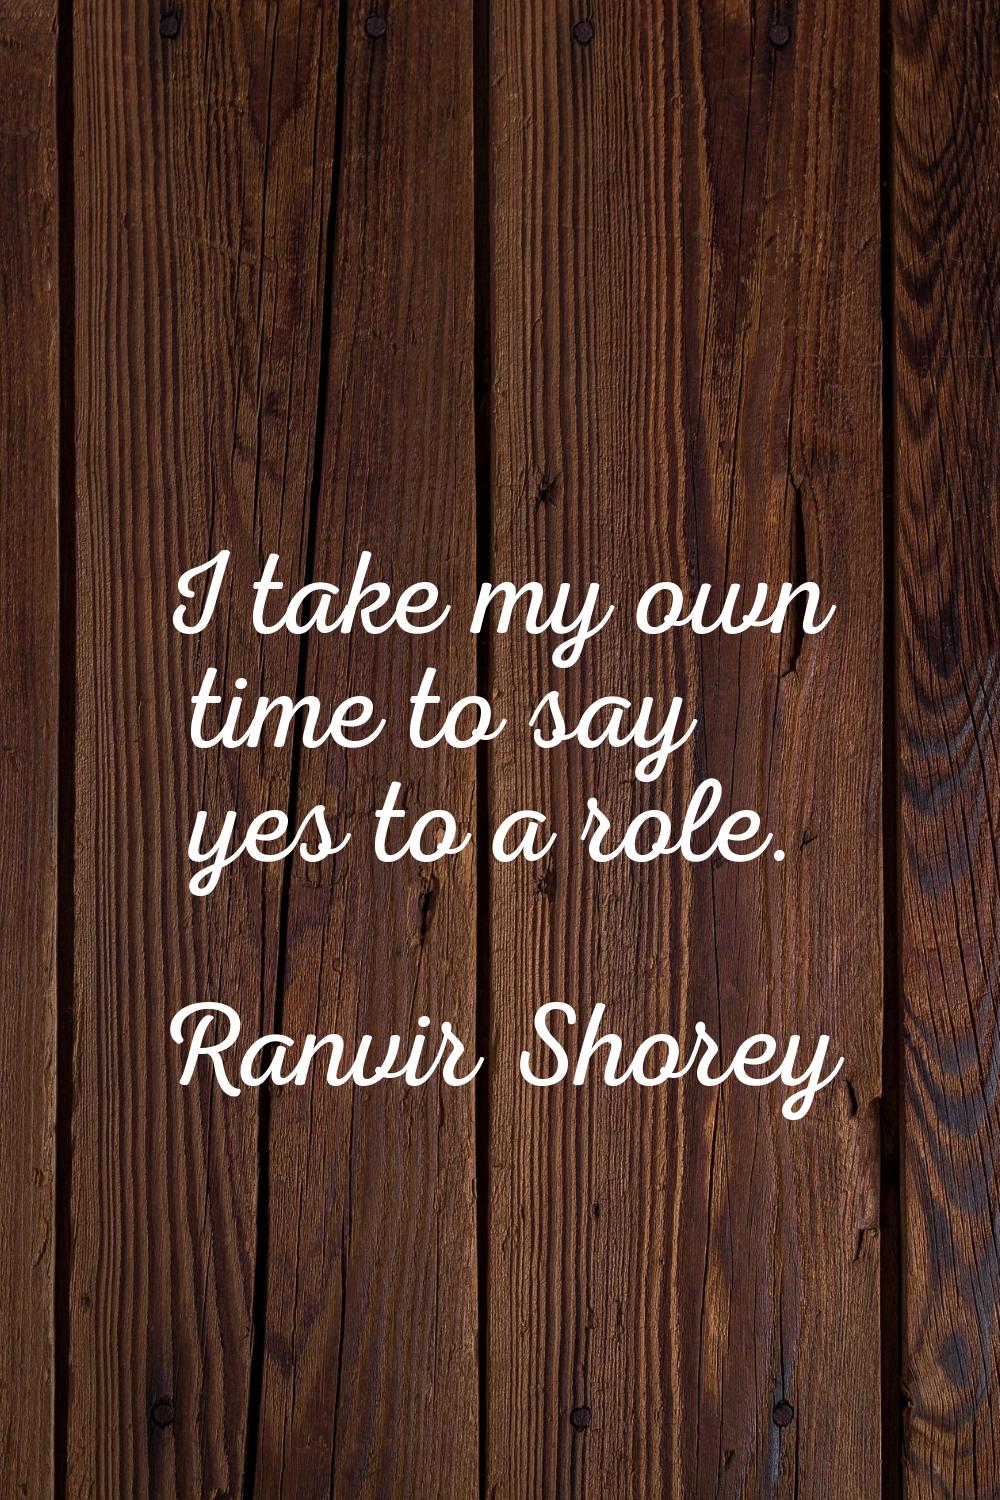 I take my own time to say yes to a role.